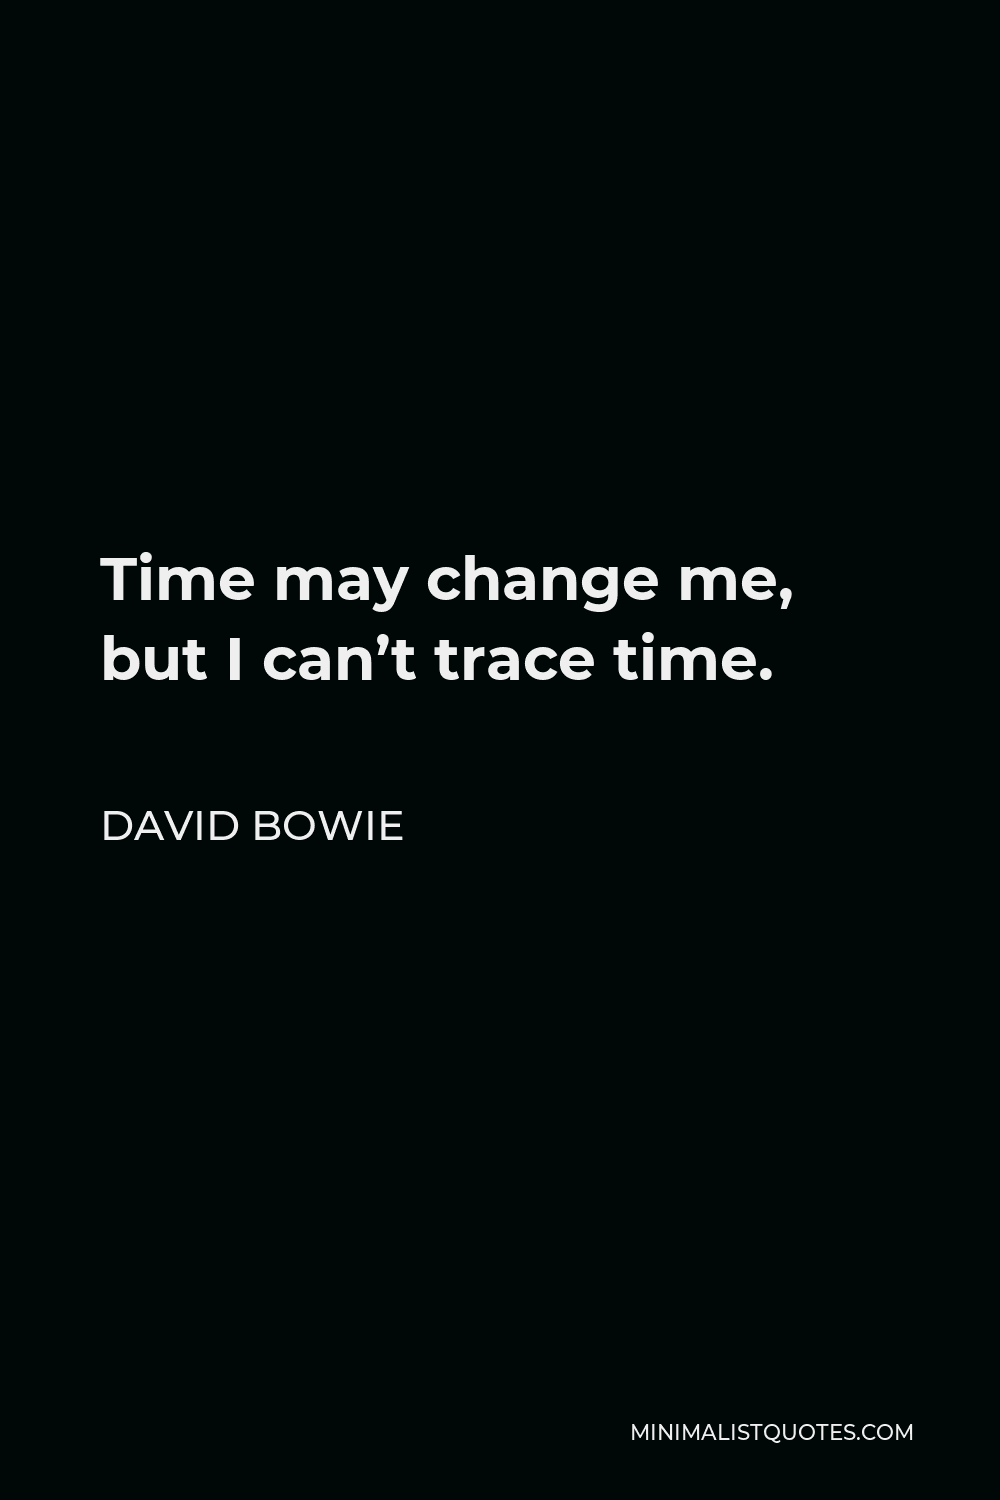 David Bowie Quote - Time may change me, but I can’t trace time.